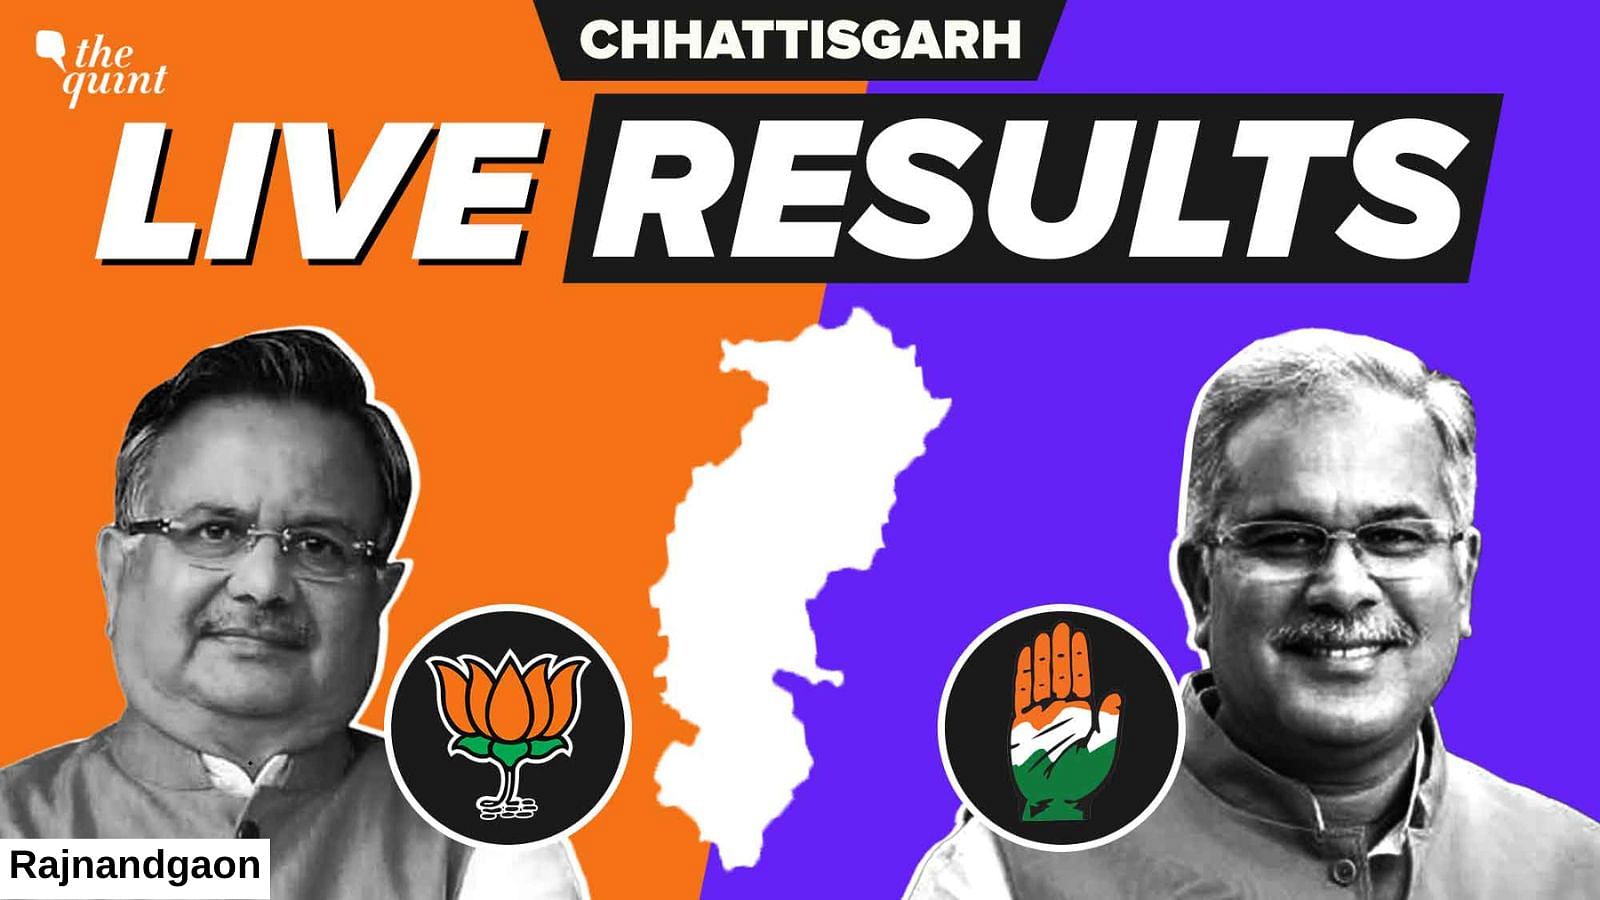 <div class="paragraphs"><p>Rajnandgaon Election Result 2023 live updates for Chhattisgarh Assembly elections<br><br>The Quint</p></div>